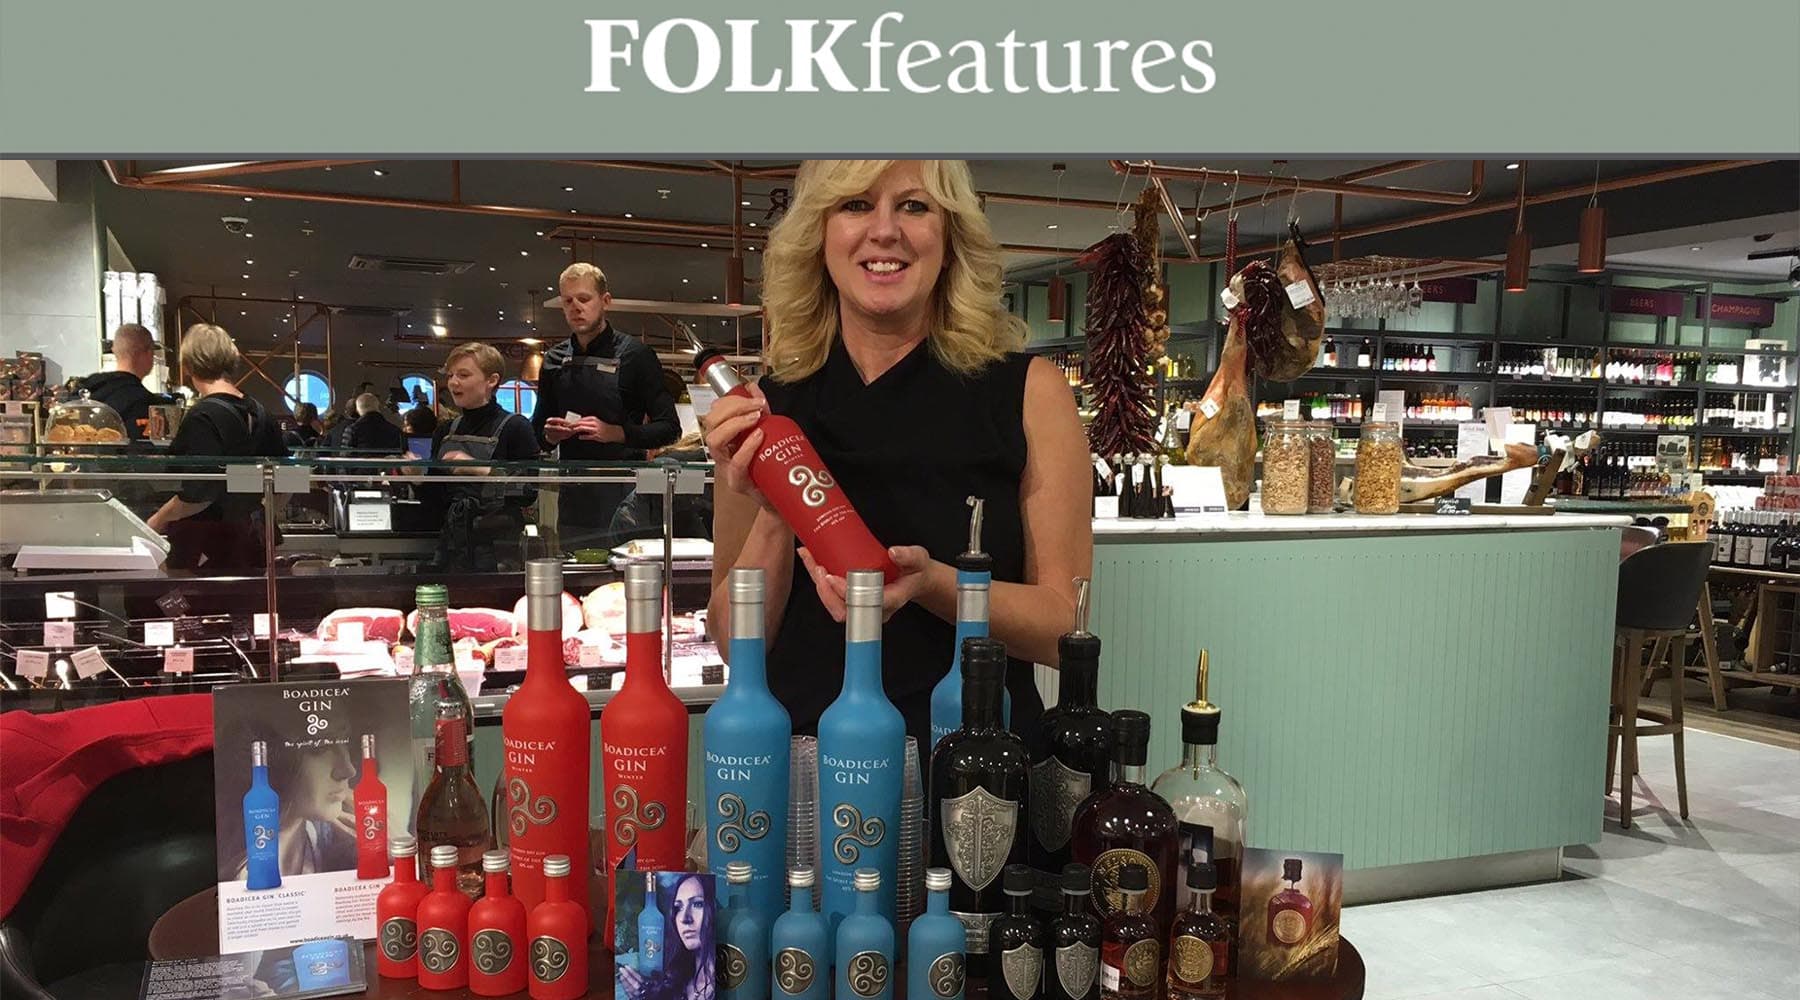 Folk Features spotlights our co-founder Steph on International Women's Day